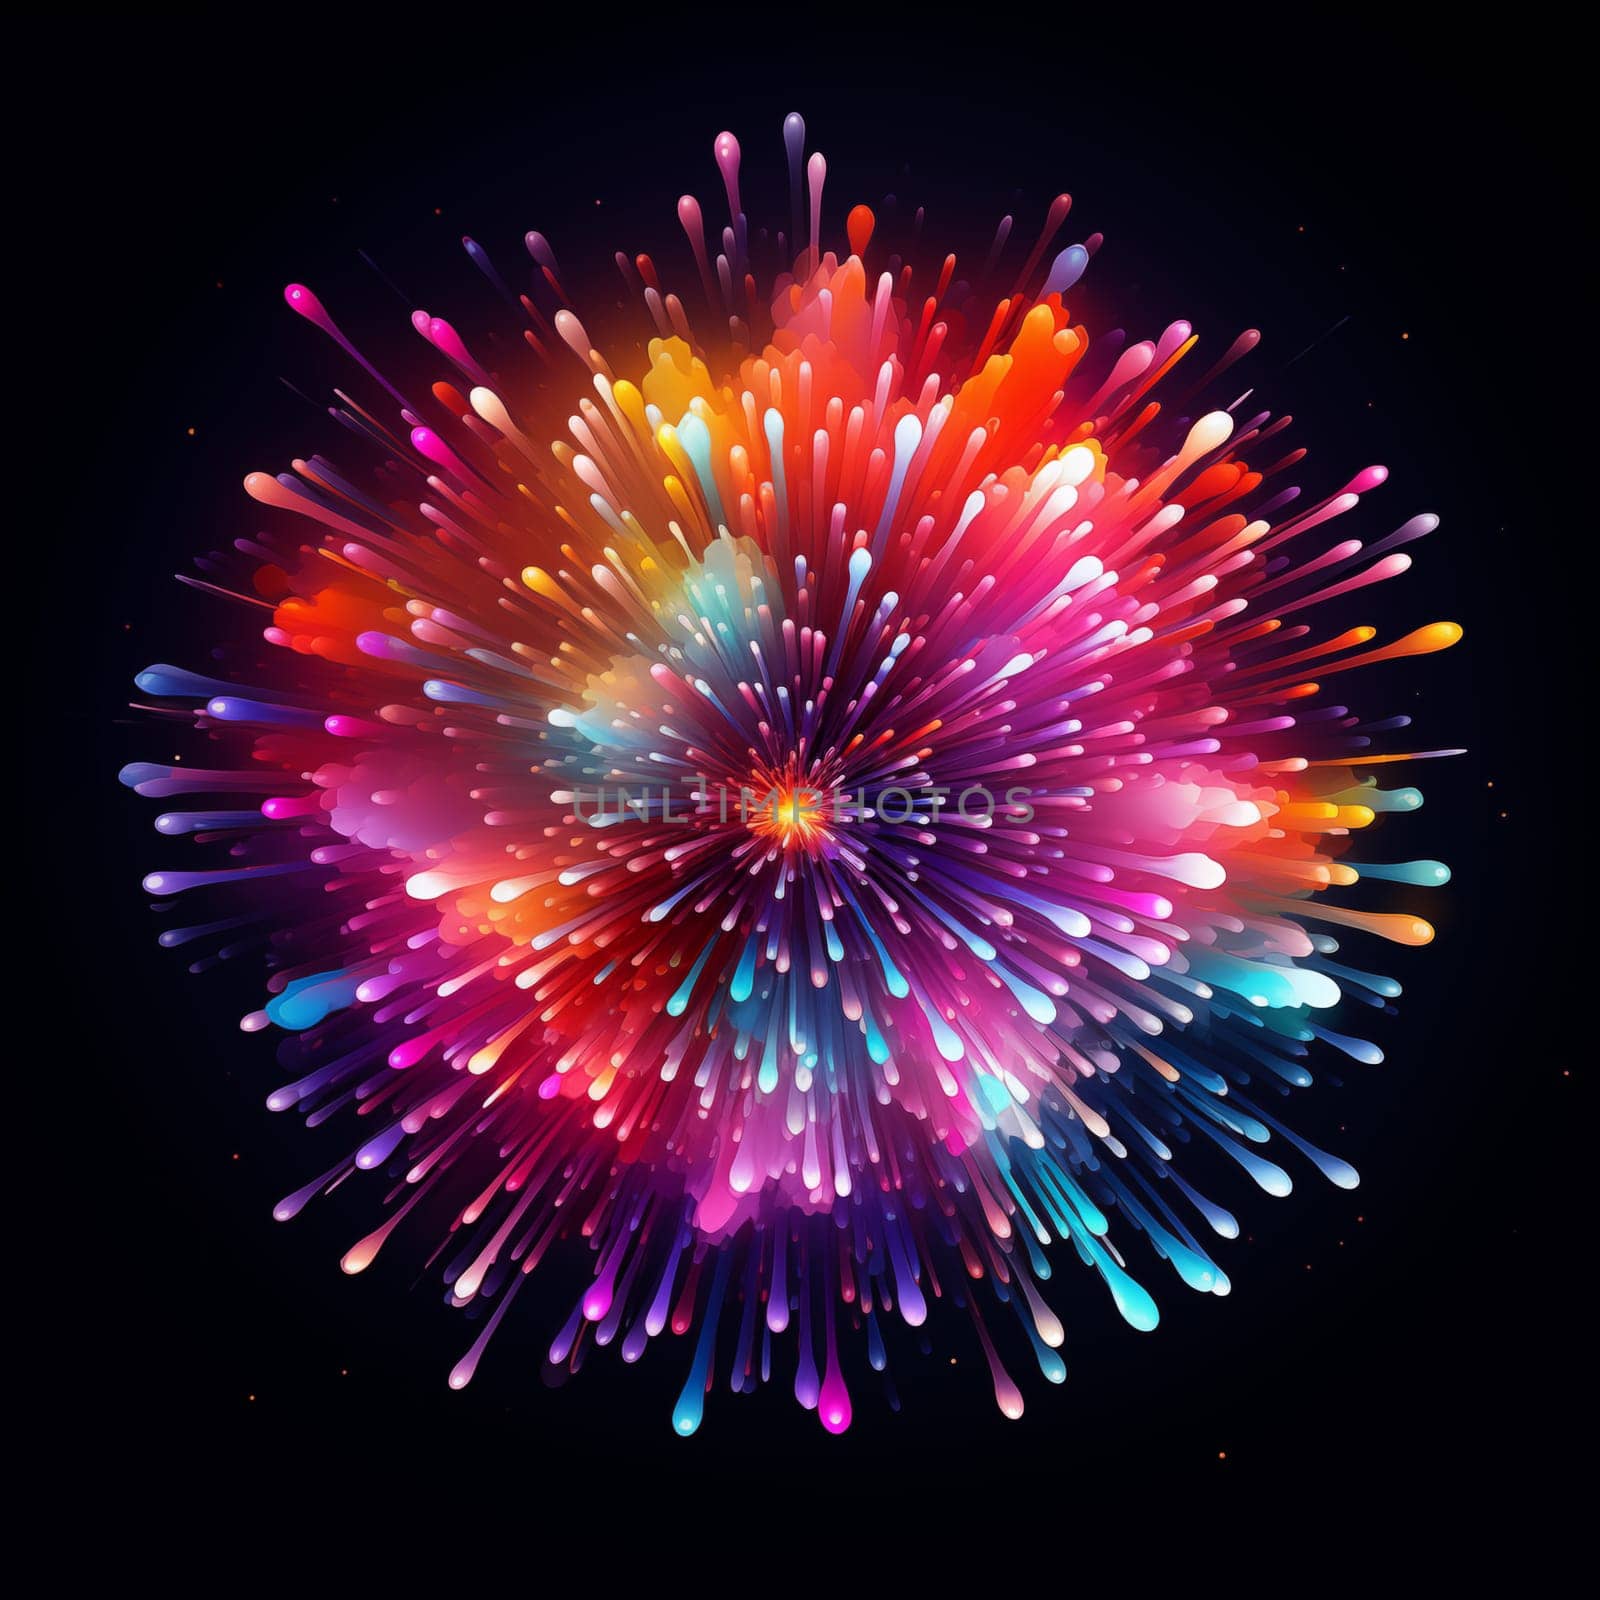 One vivid colorful fireworks on black background isolated.